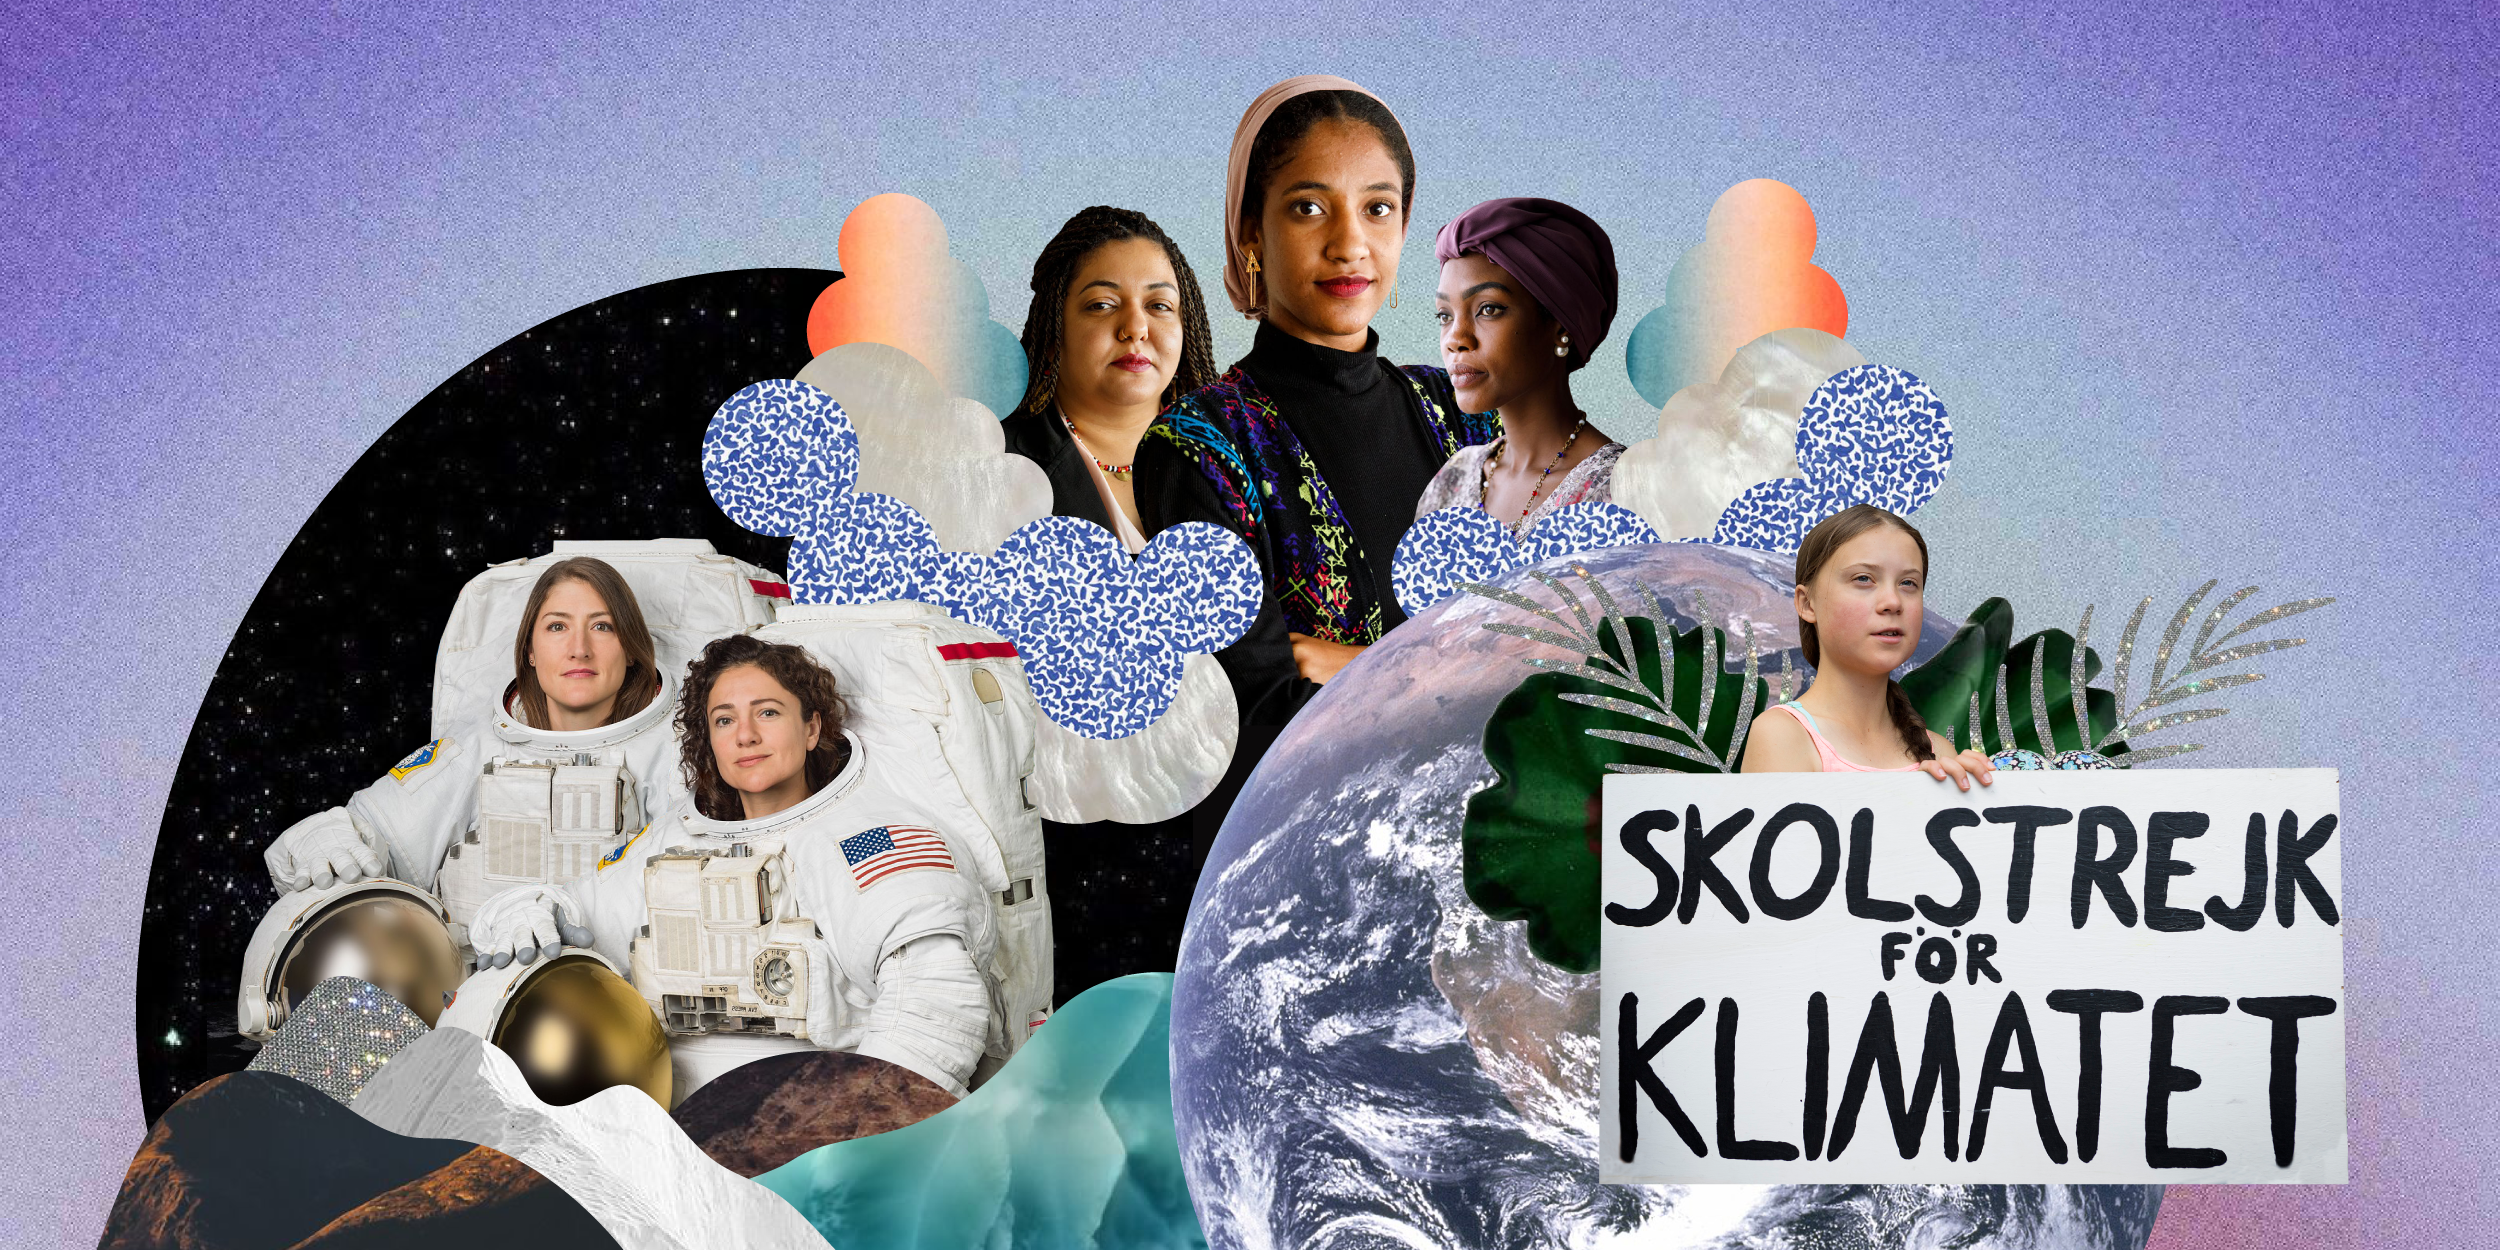 collage of some of the women who defined 2019: Women astronauts, Sudanese activists and Greta Thunberg